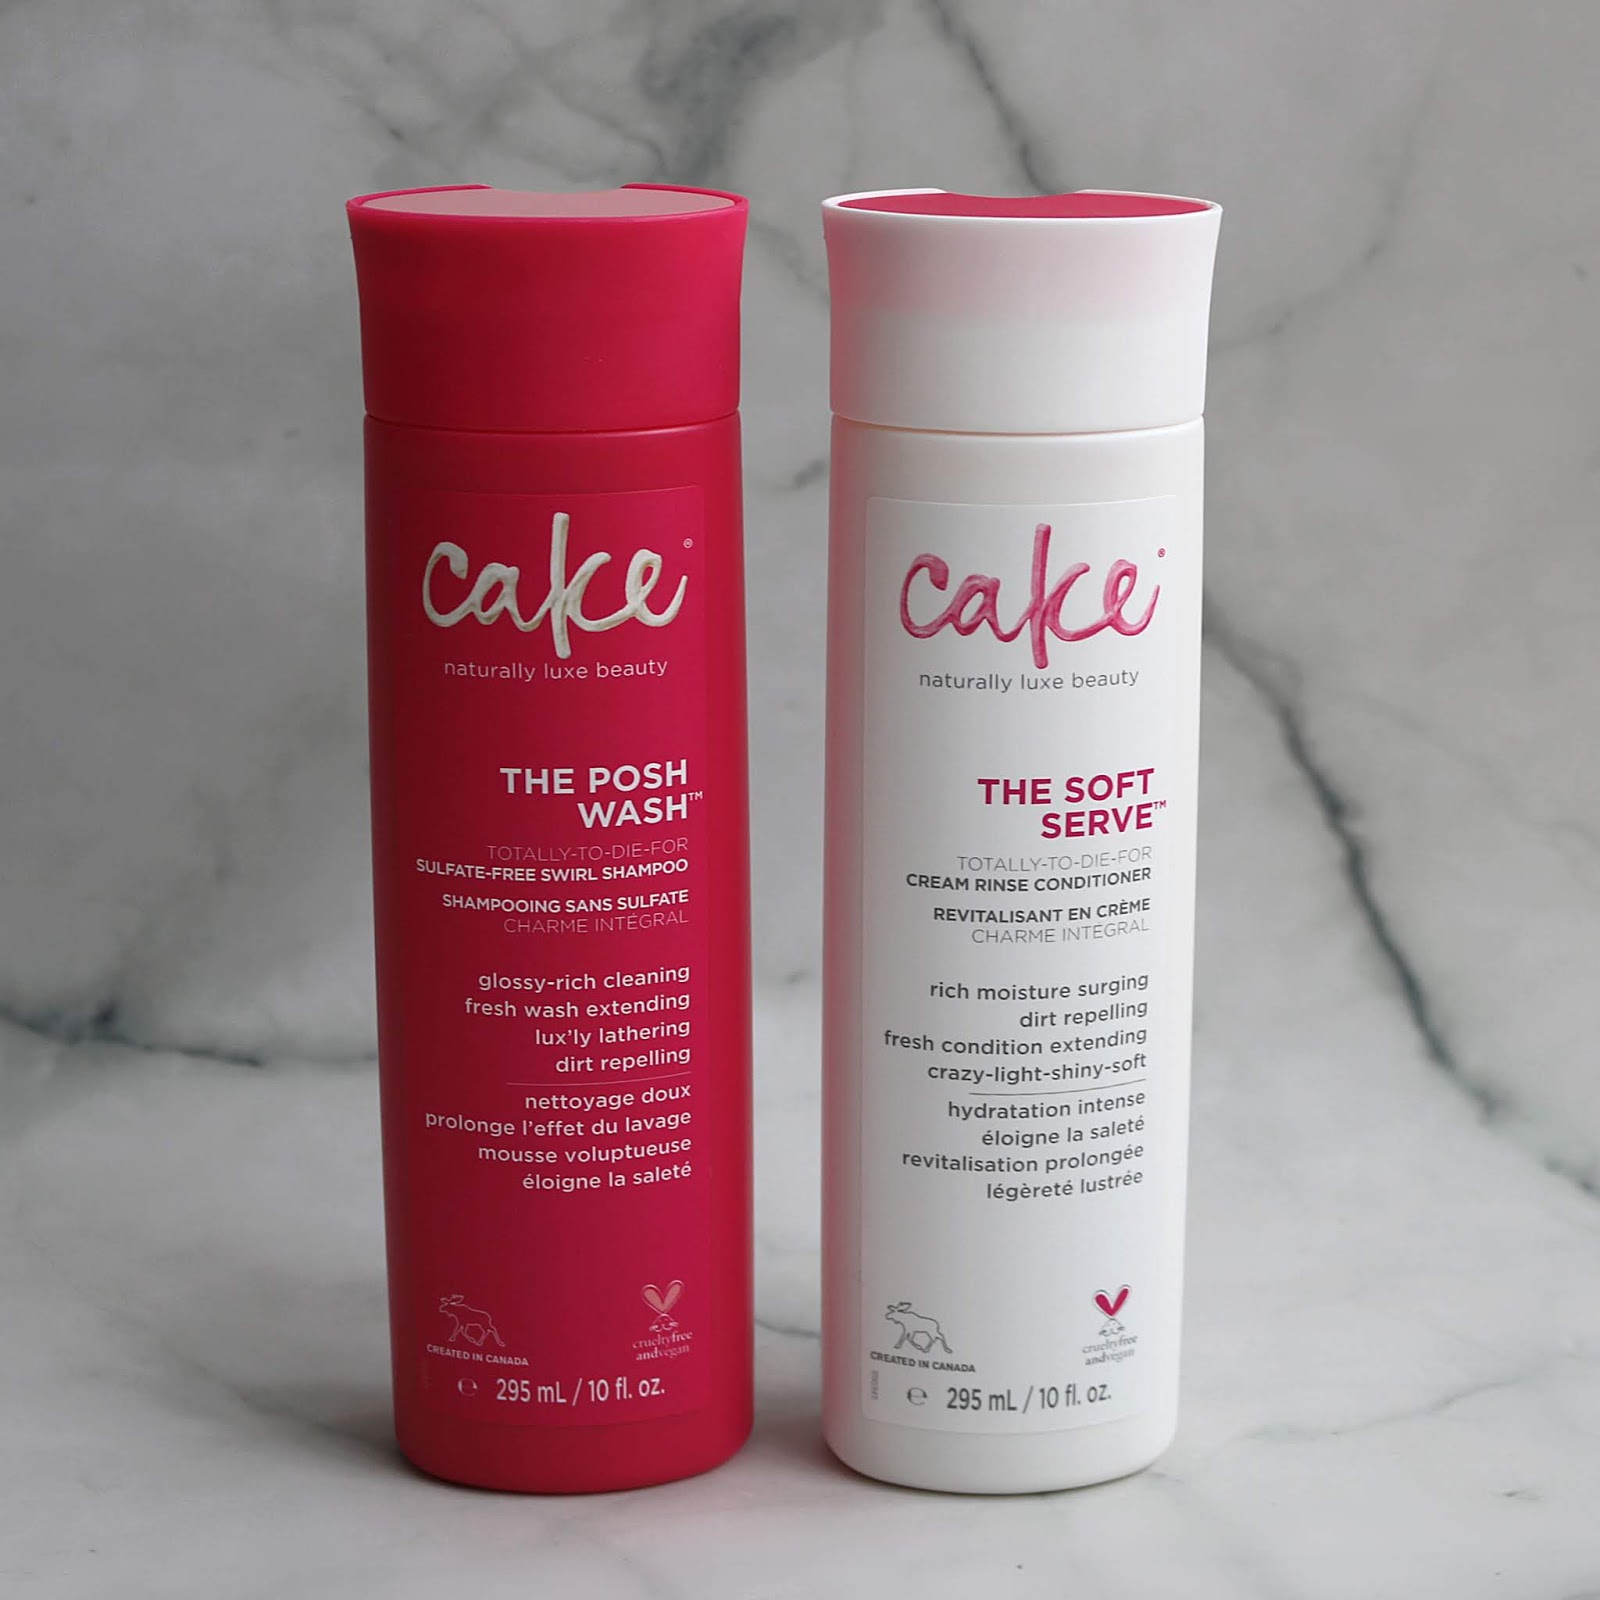 Cake Beauty Vegan Hair Care and Skincare | Review | Natalie Loves Beauty